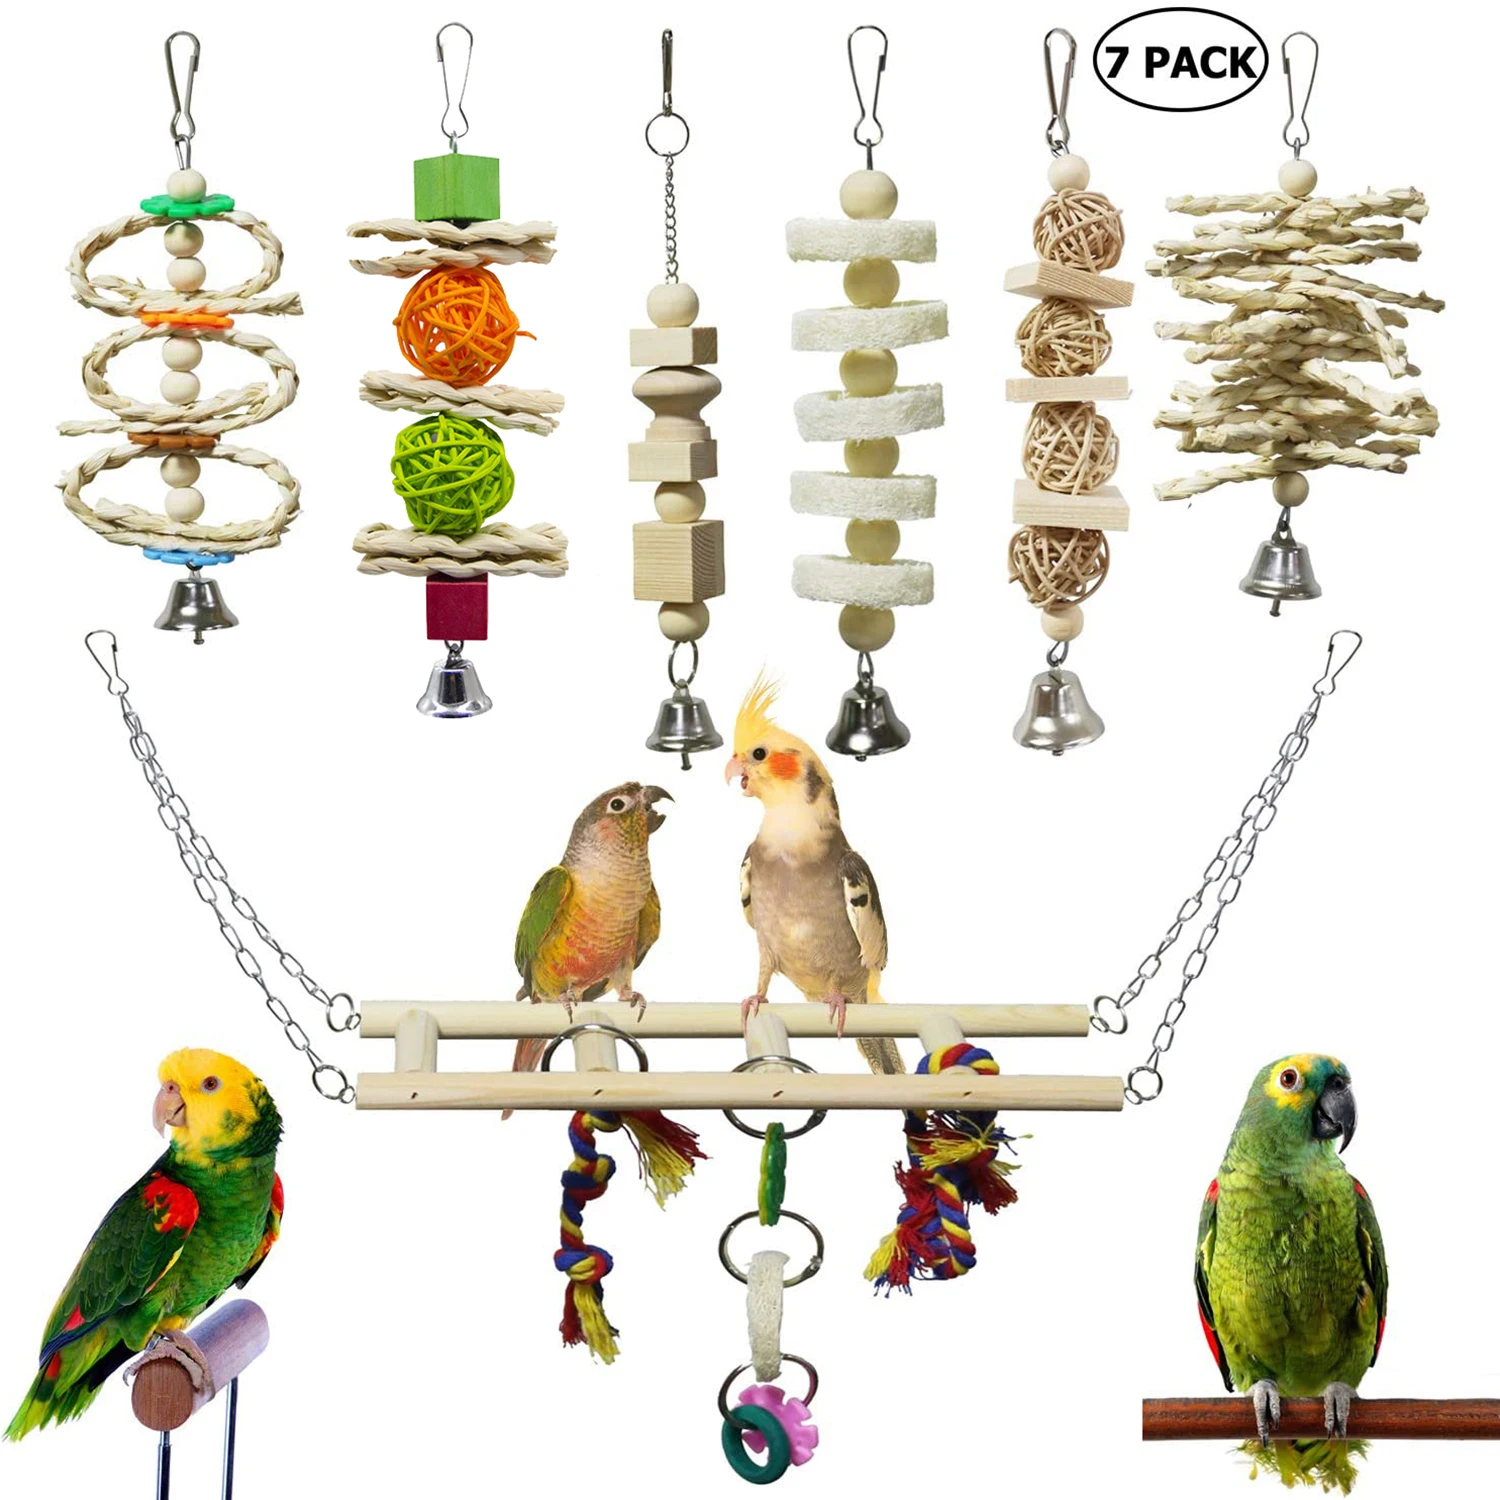 

7 Packs Macaw Bird Parrot Foraging Toys Natural Wood Chewing Toys Hanging Swing Toys for Birds Cage, Pictures shown